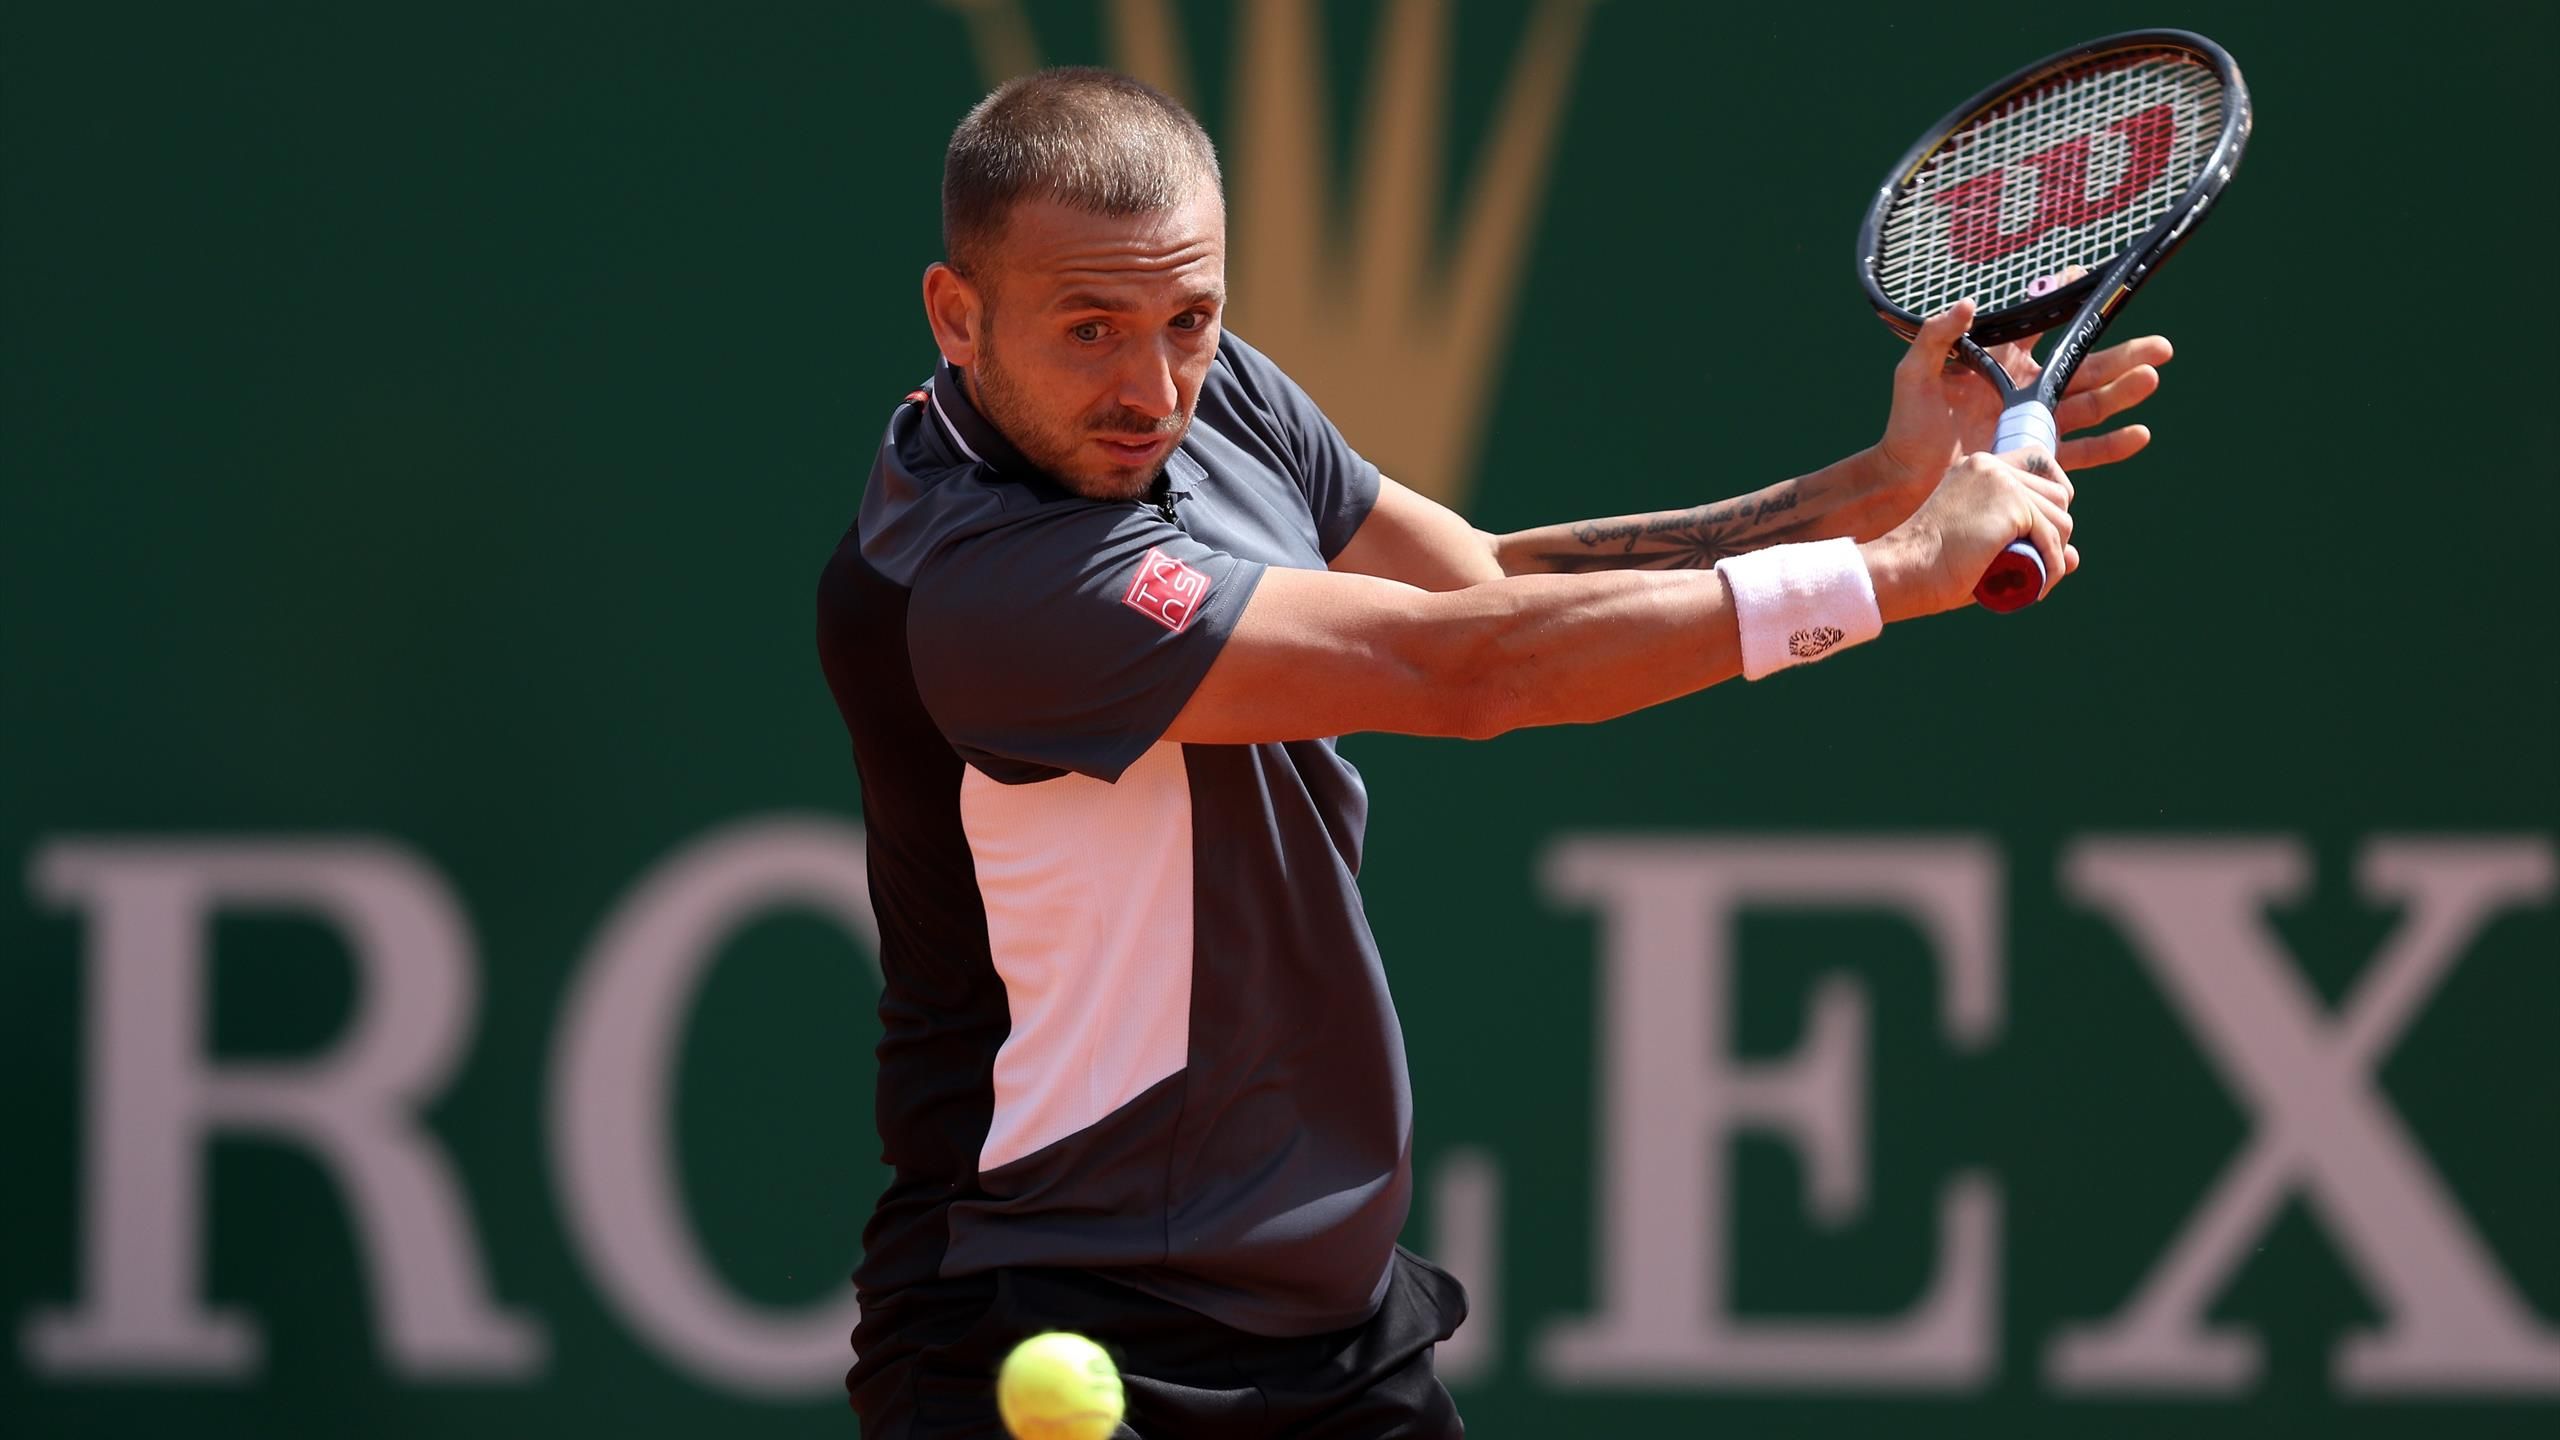 Dan Evans progresses to the second round of Monte Carlo Masters after victory over Benjamin Bonzi